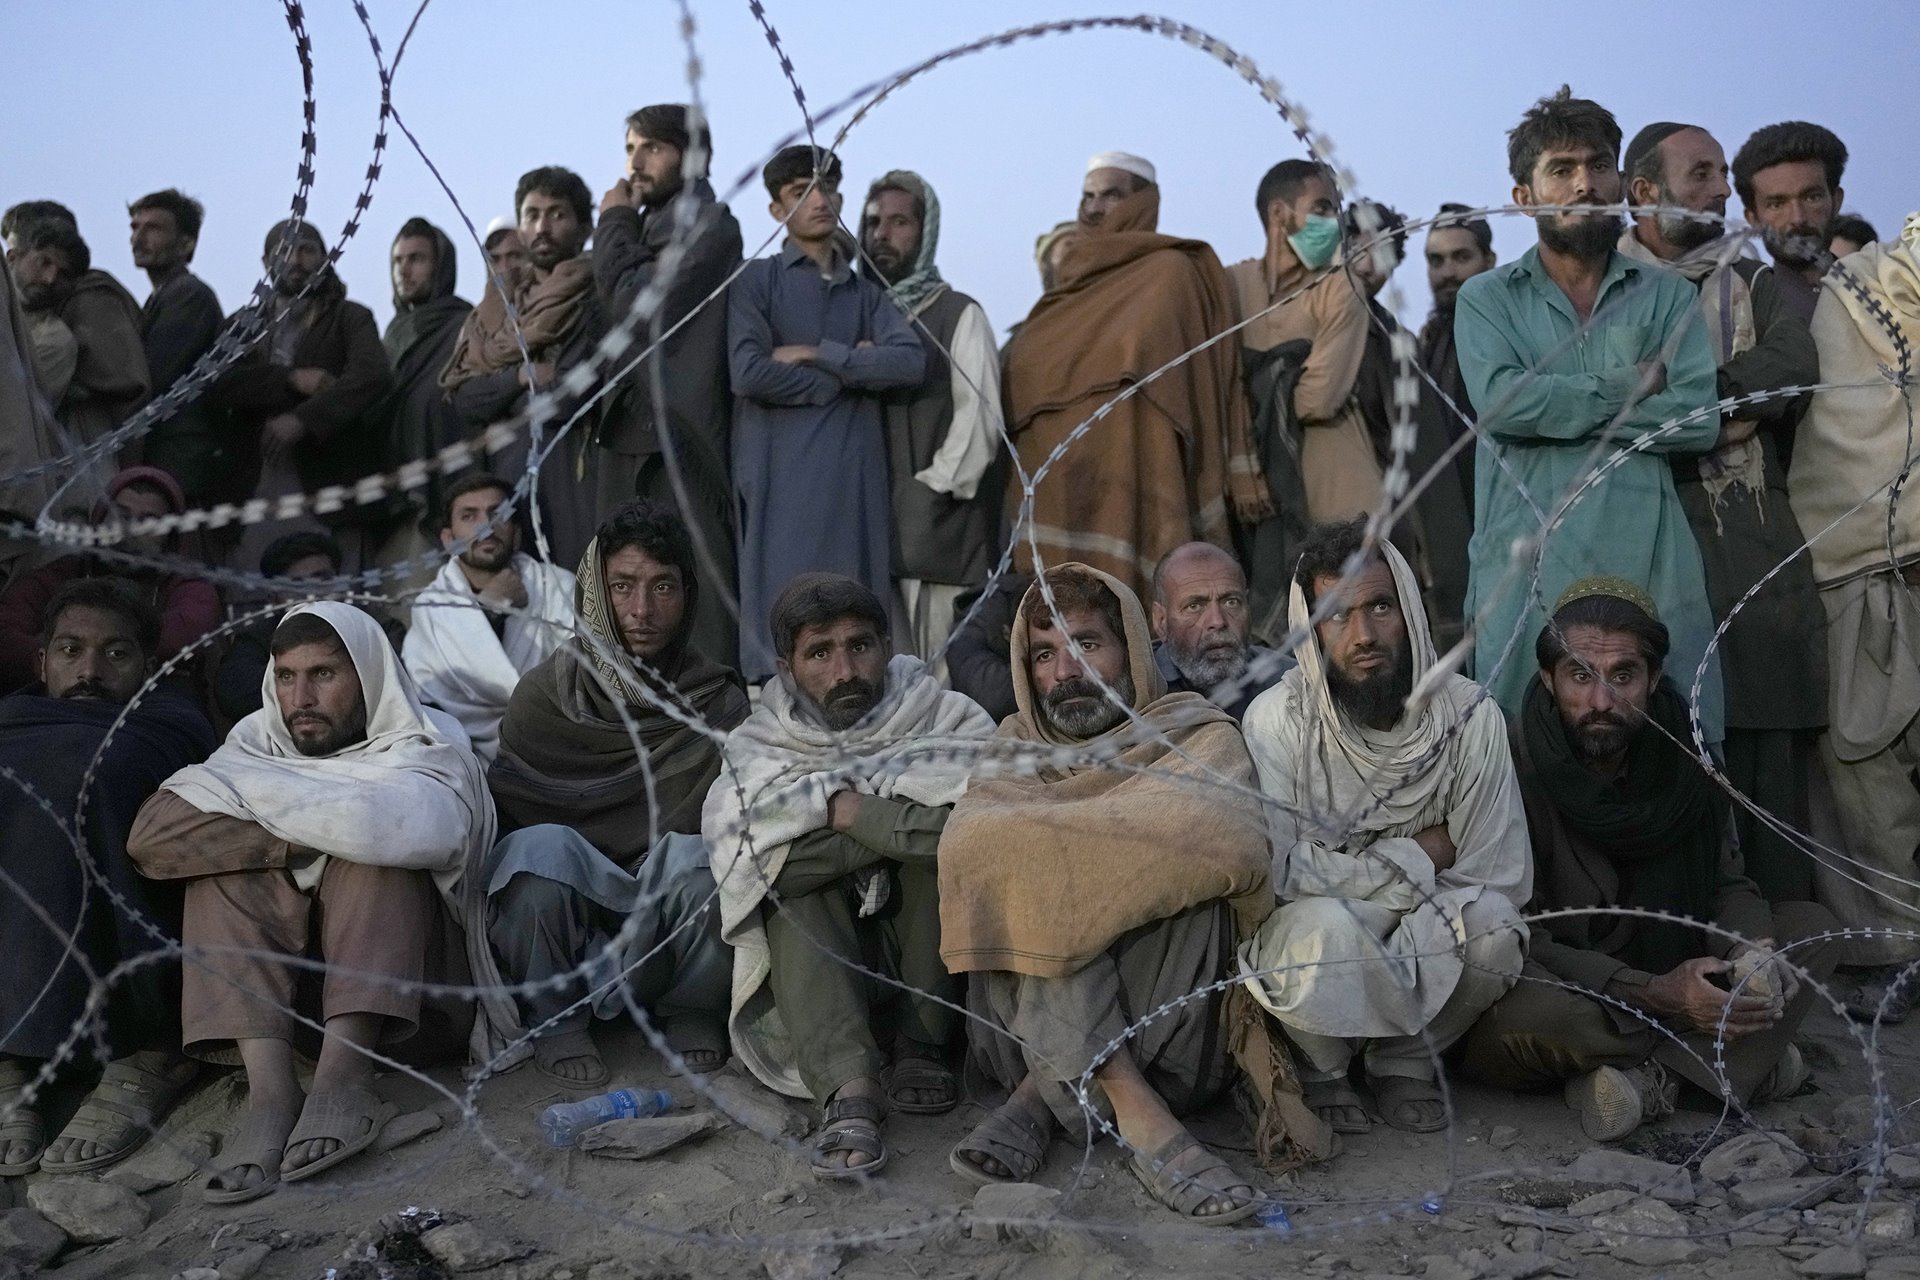 People wait to register in a refugee camp in Torkham, Afghanistan, near the main border crossing from Pakistan into Afghanistan, days after the Pakistan government&rsquo;s 1 November deadline for the deportation of undocumented Afghans.